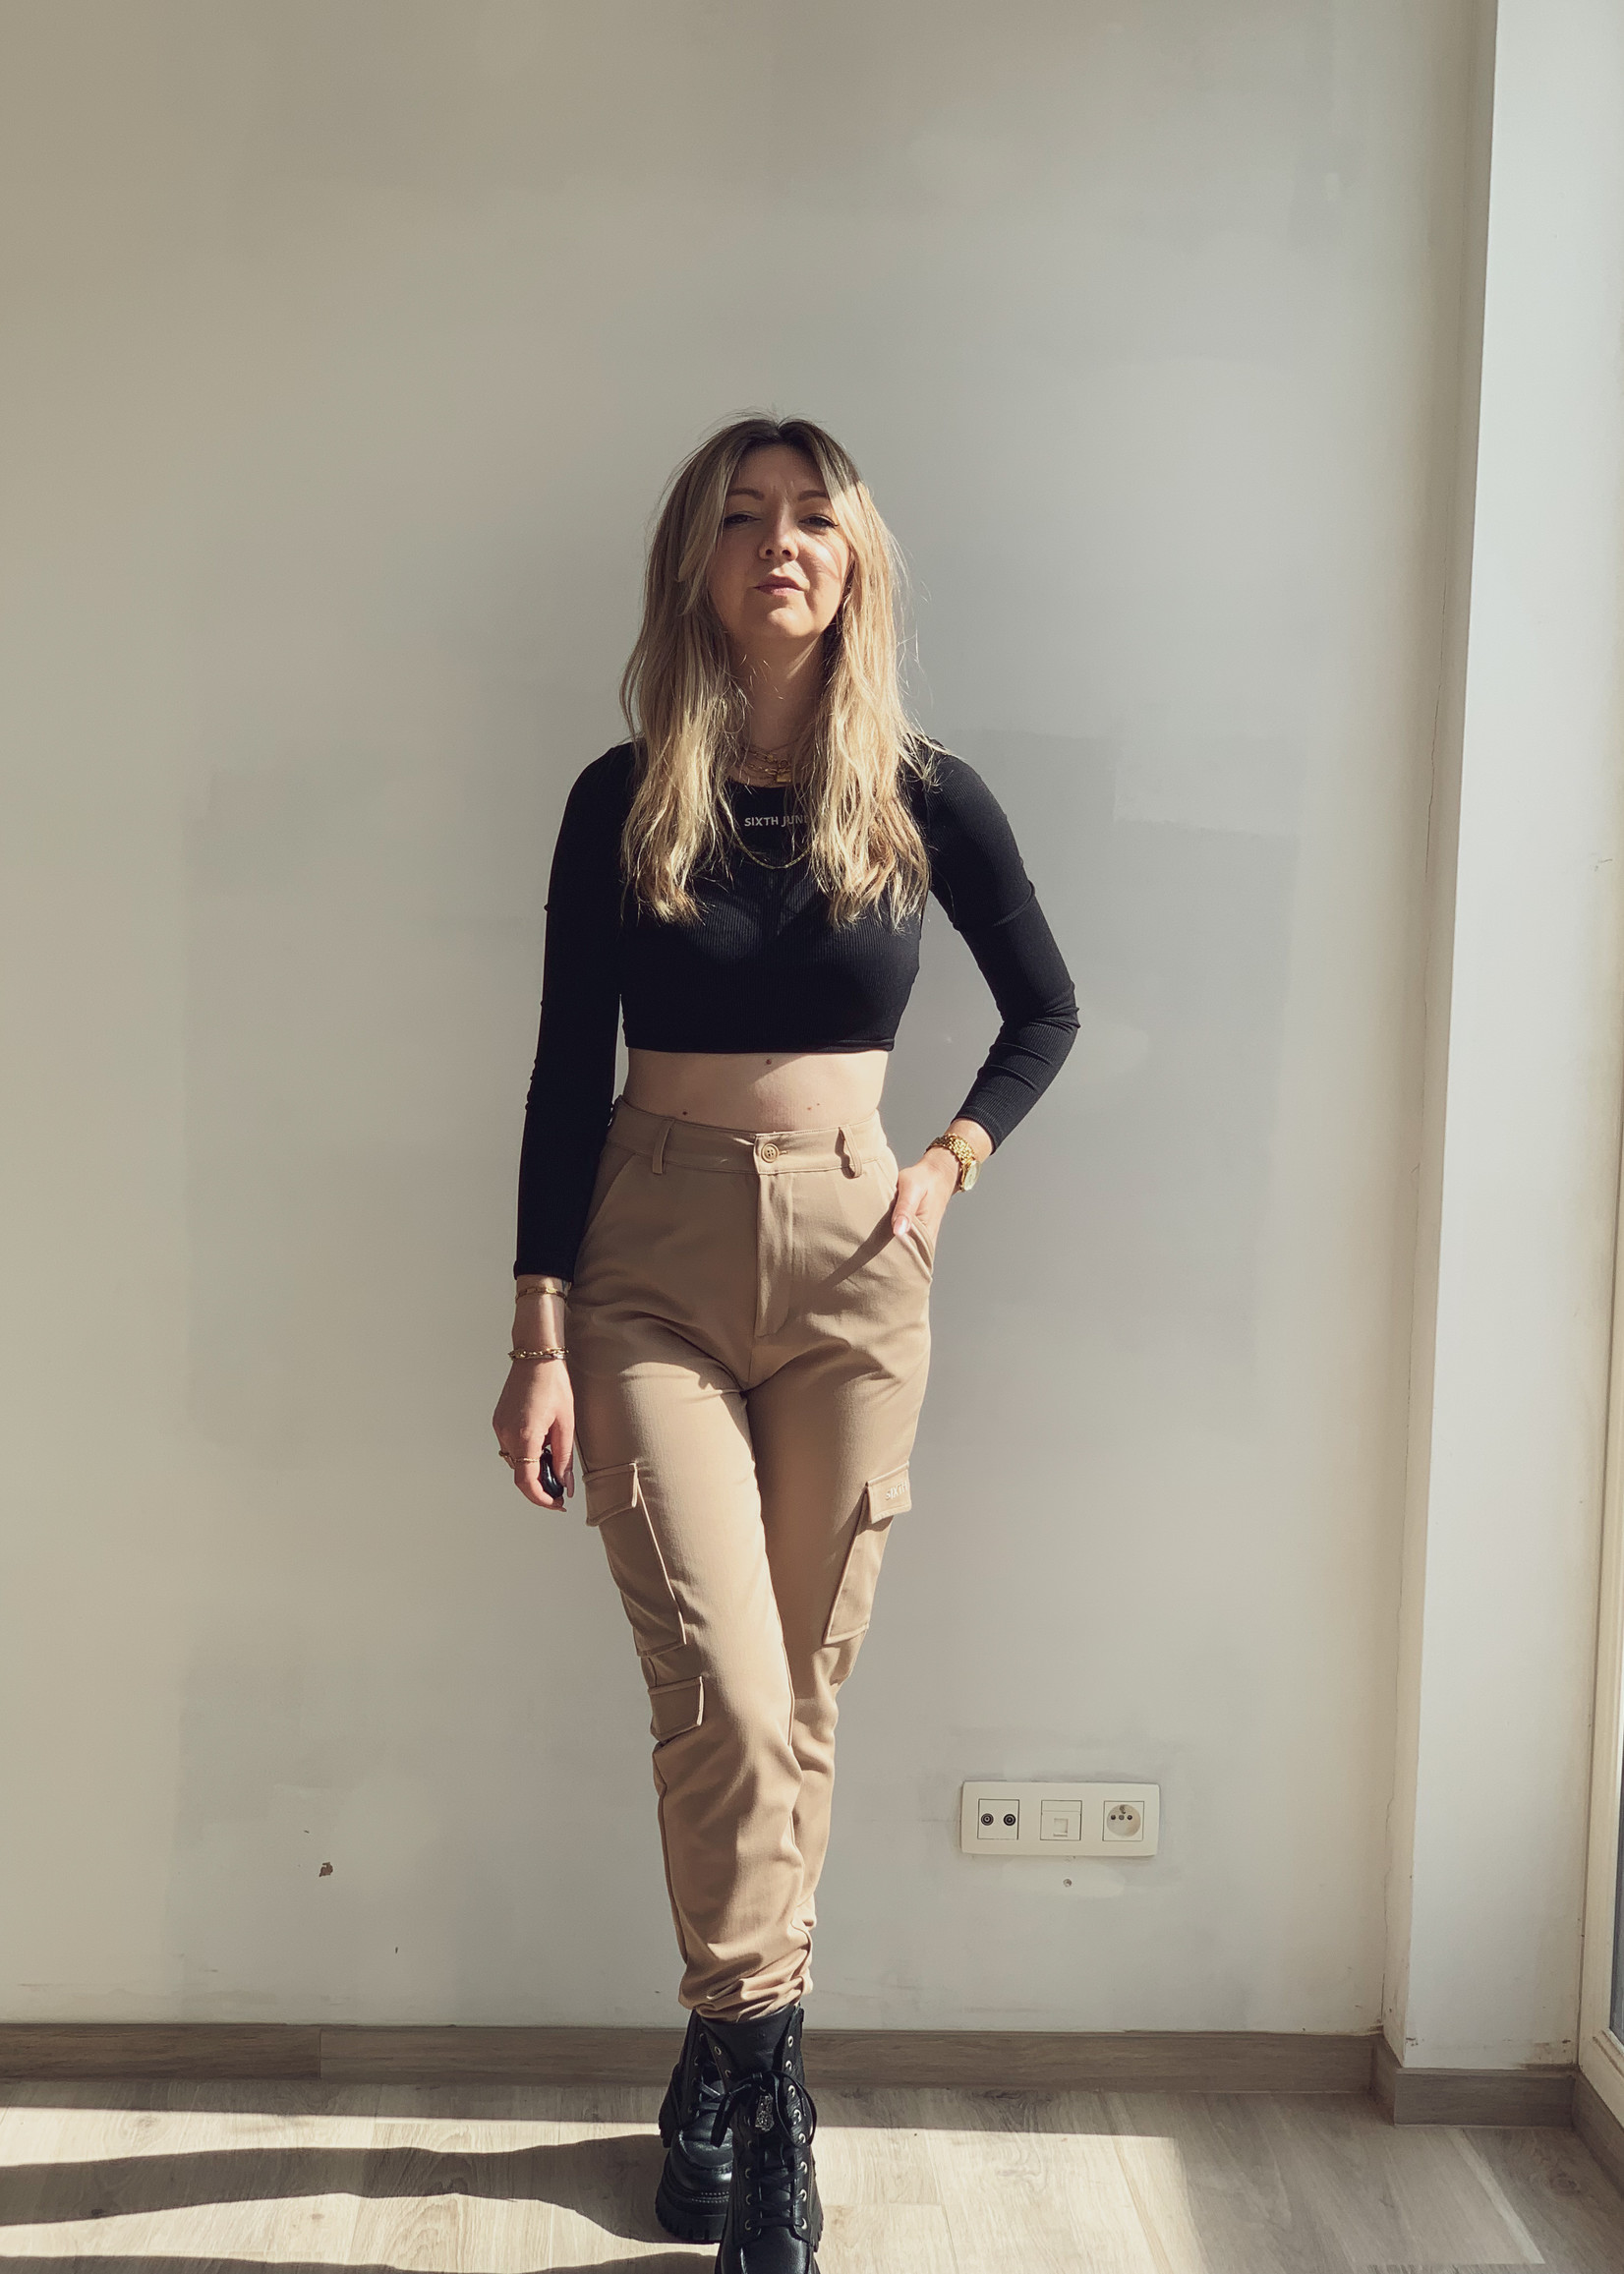 Embroidered cargo pants Beige